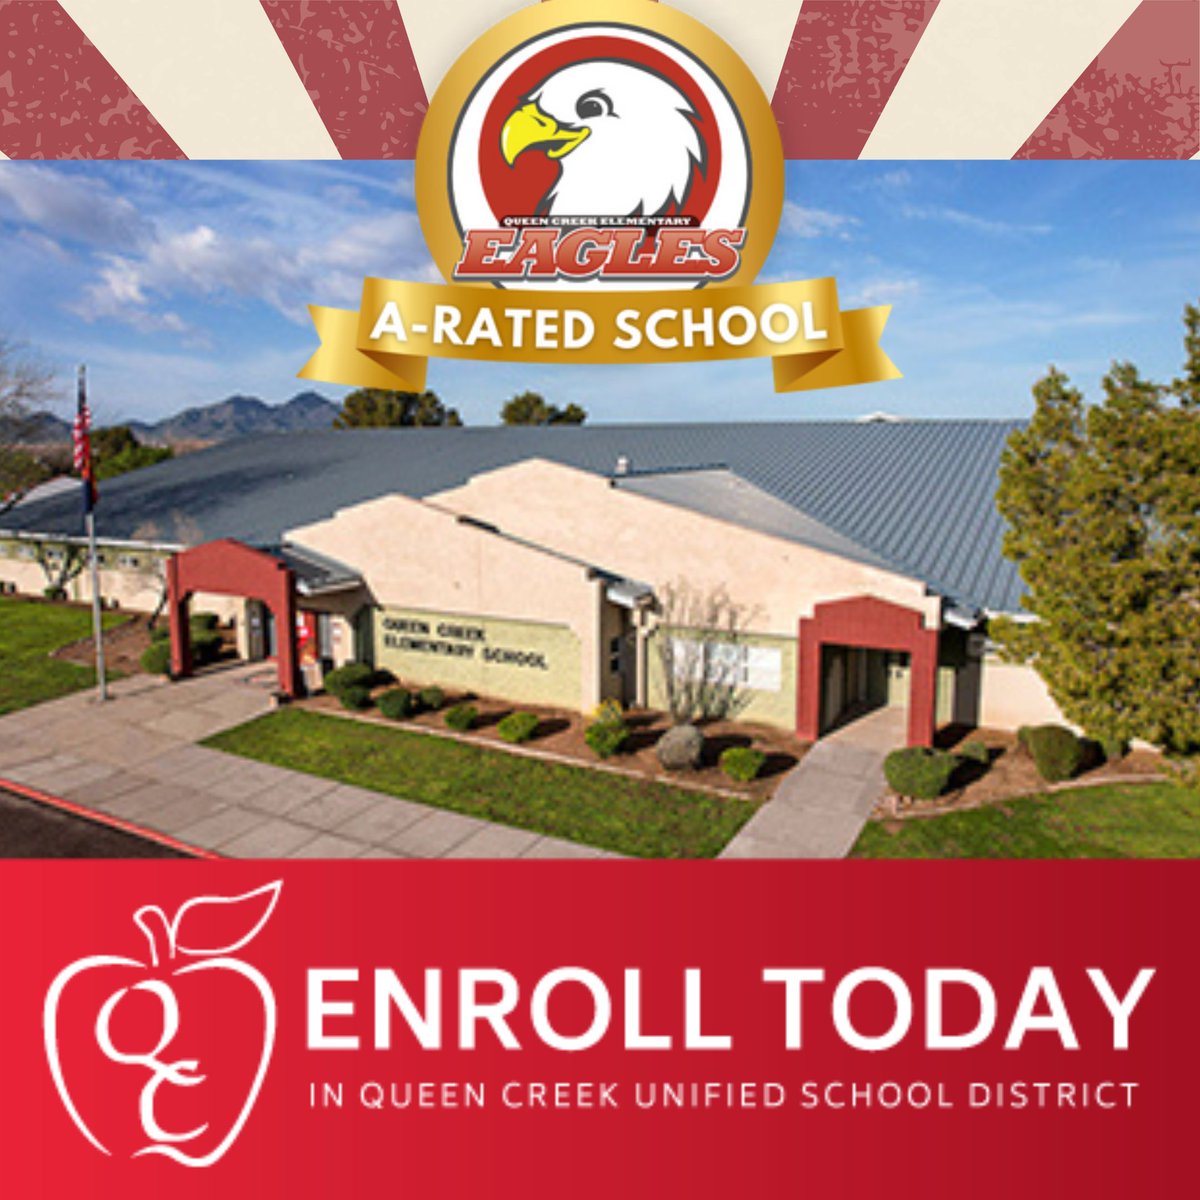 Enroll today at QCUSD.ORG/enroll #qceleads #qcleads #QCEEaglesSoar